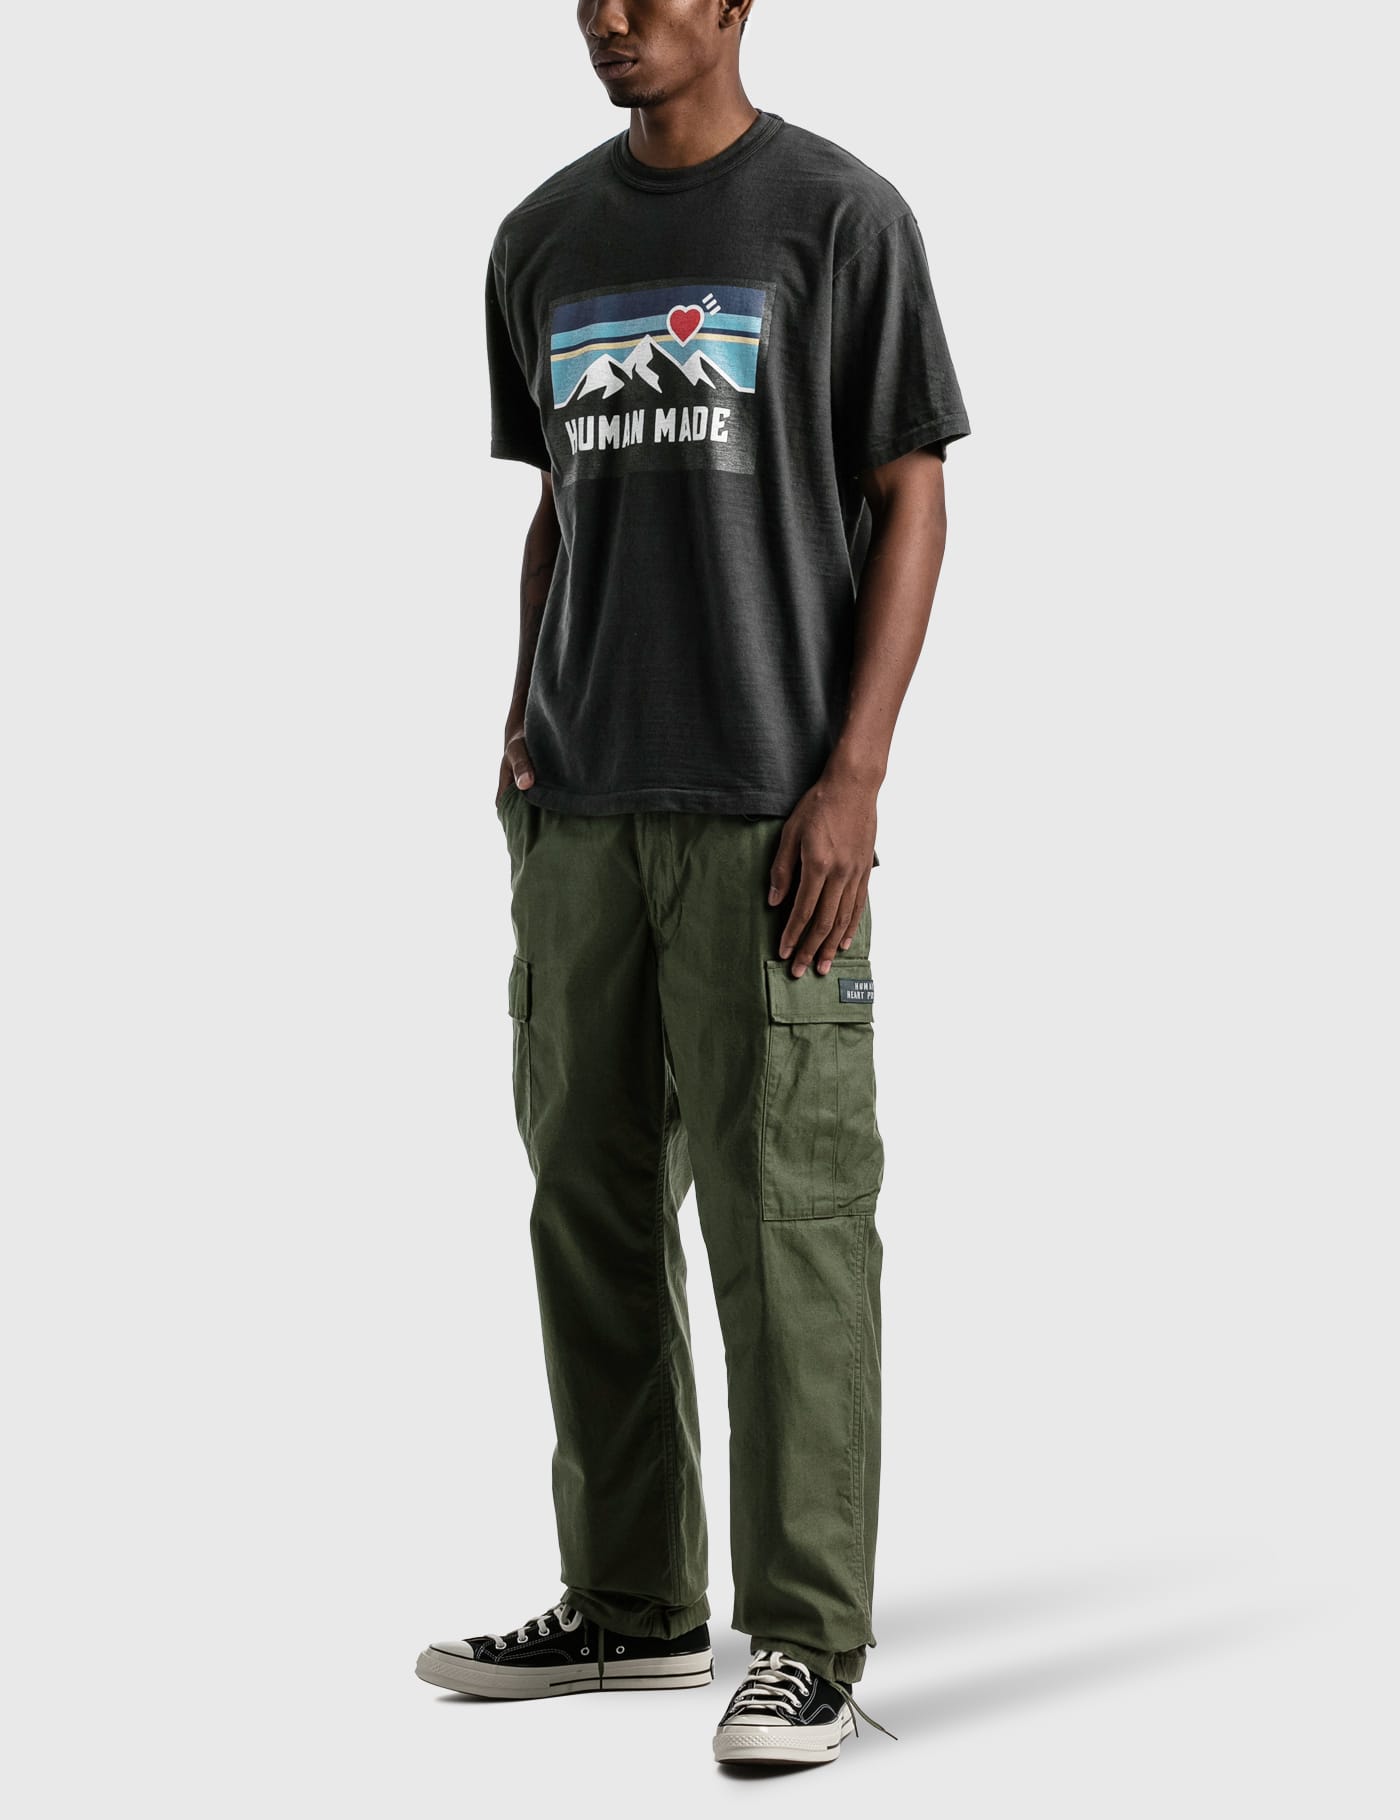 Human Made - Cargo Pants | HBX - Globally Curated Fashion